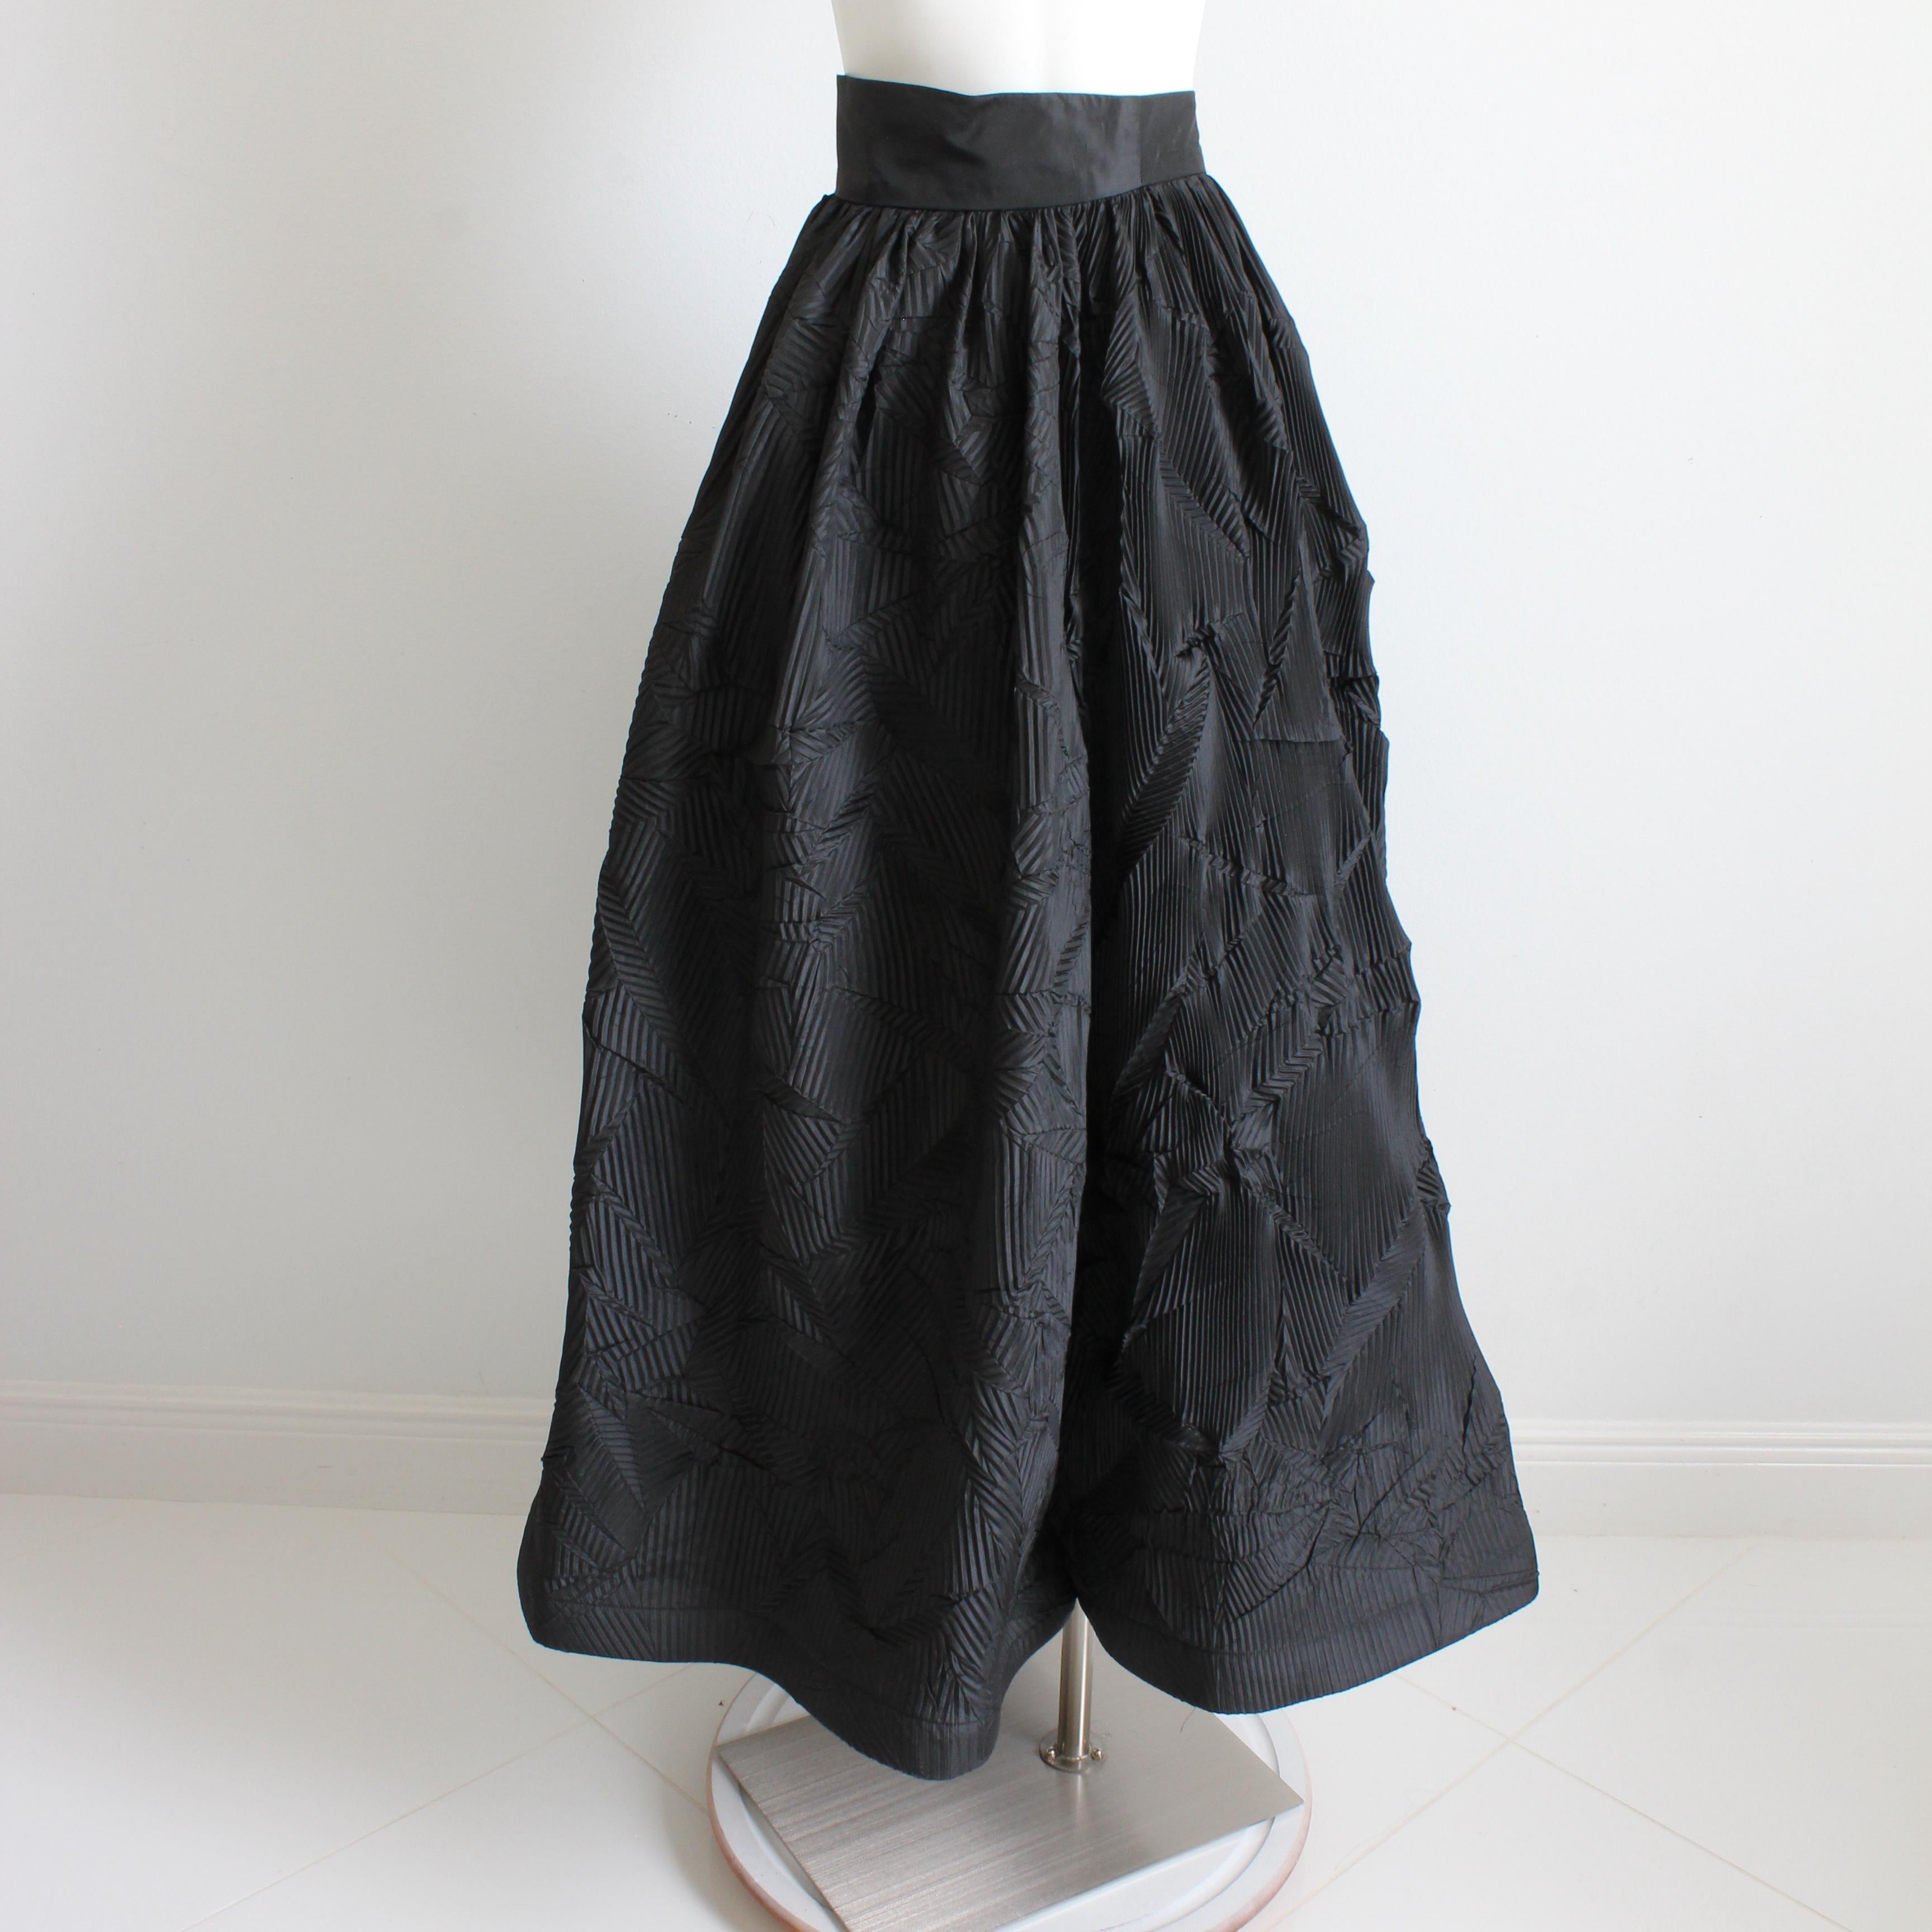 This stunning formal skirt was made by designer Sully Bonnelly, most likely in the 90s.  Made from what we believe is a rayon blend fabric (no content tags), this piece features TONS of pleats in various patterns throughout! Both the lining and the